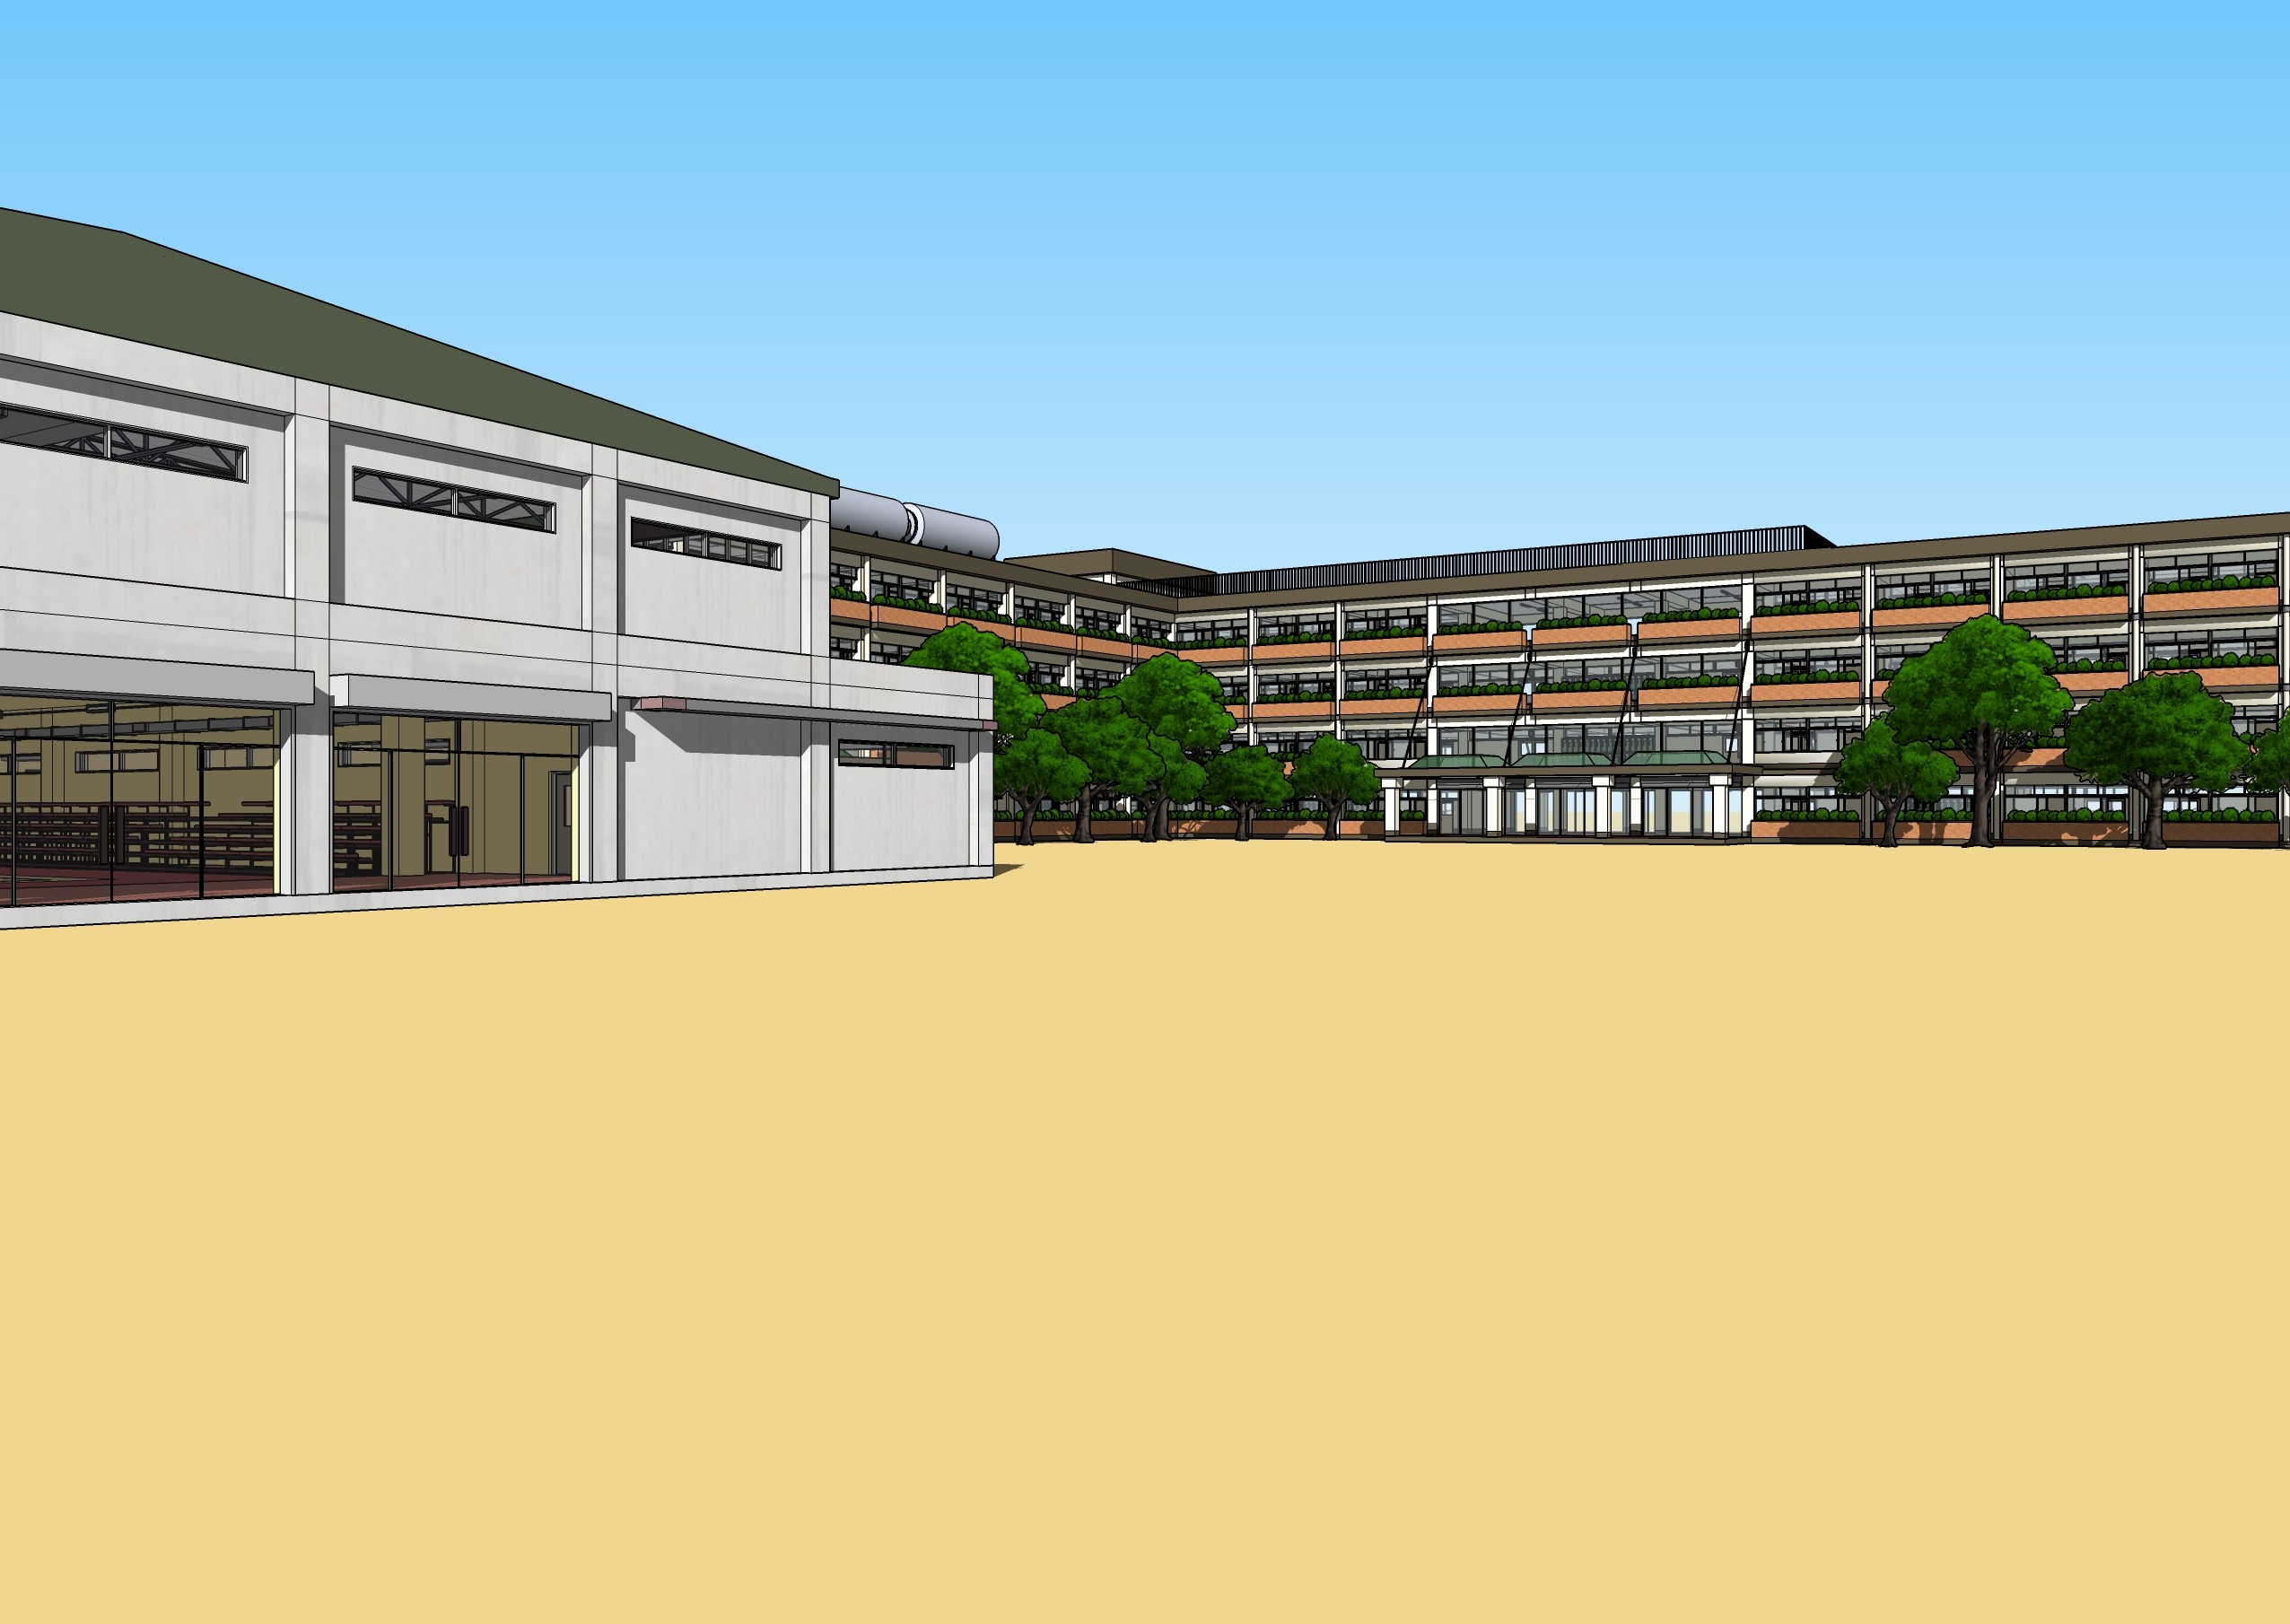 anime school wallpaper,property,building,architecture,residential area,house